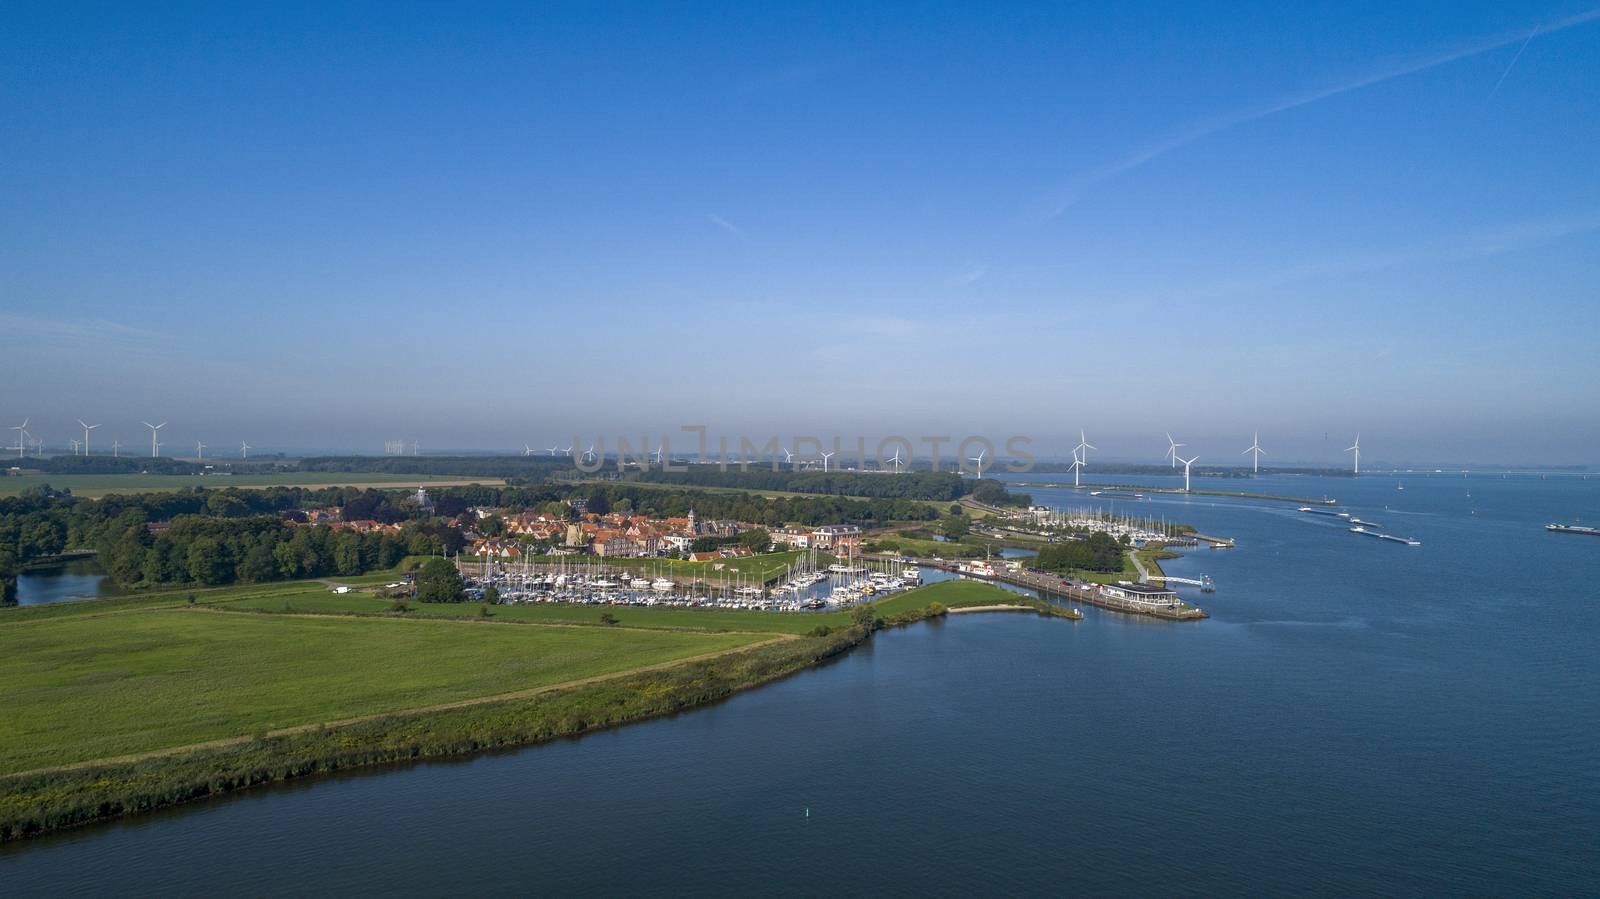 Aerial view of the fortified city of Willemstad, Moerdijk in the Province of Noord-Brabant, Netherlands. Star fortifications were developed in the late fifteenth centuries